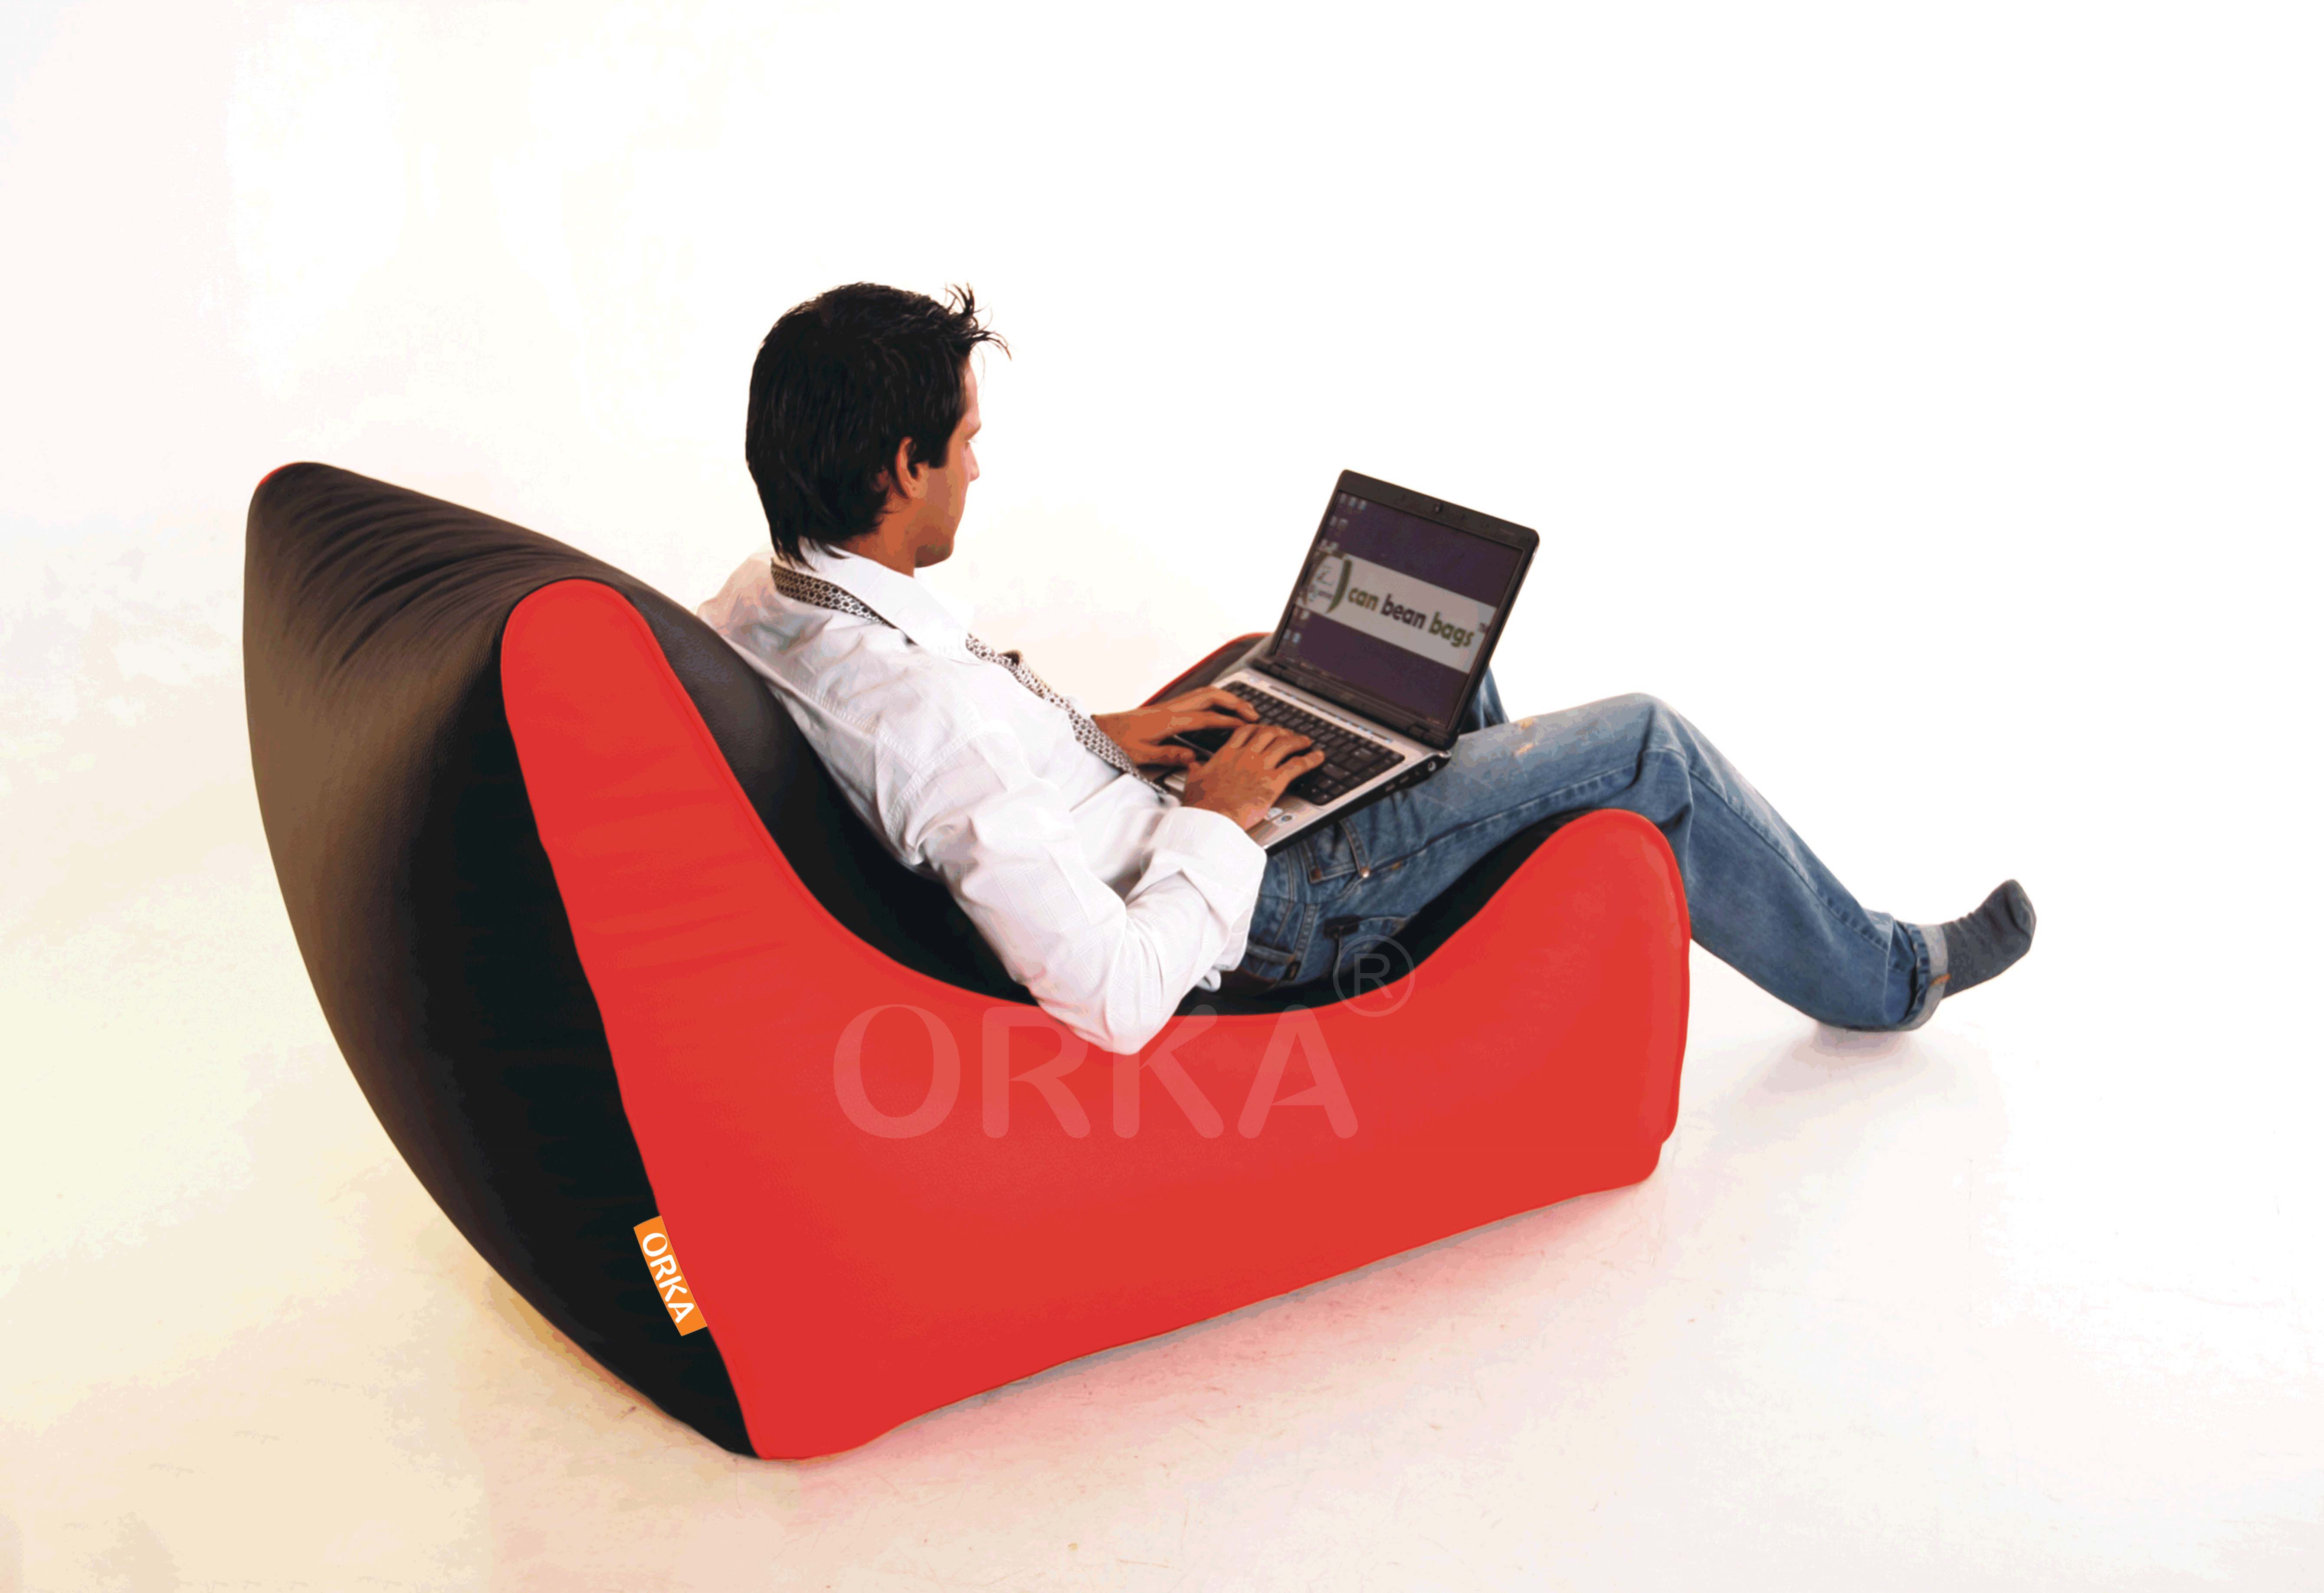 ORKA Art Leather Boy Sitting On Lounger Filled With High Density Beans - Red Black  